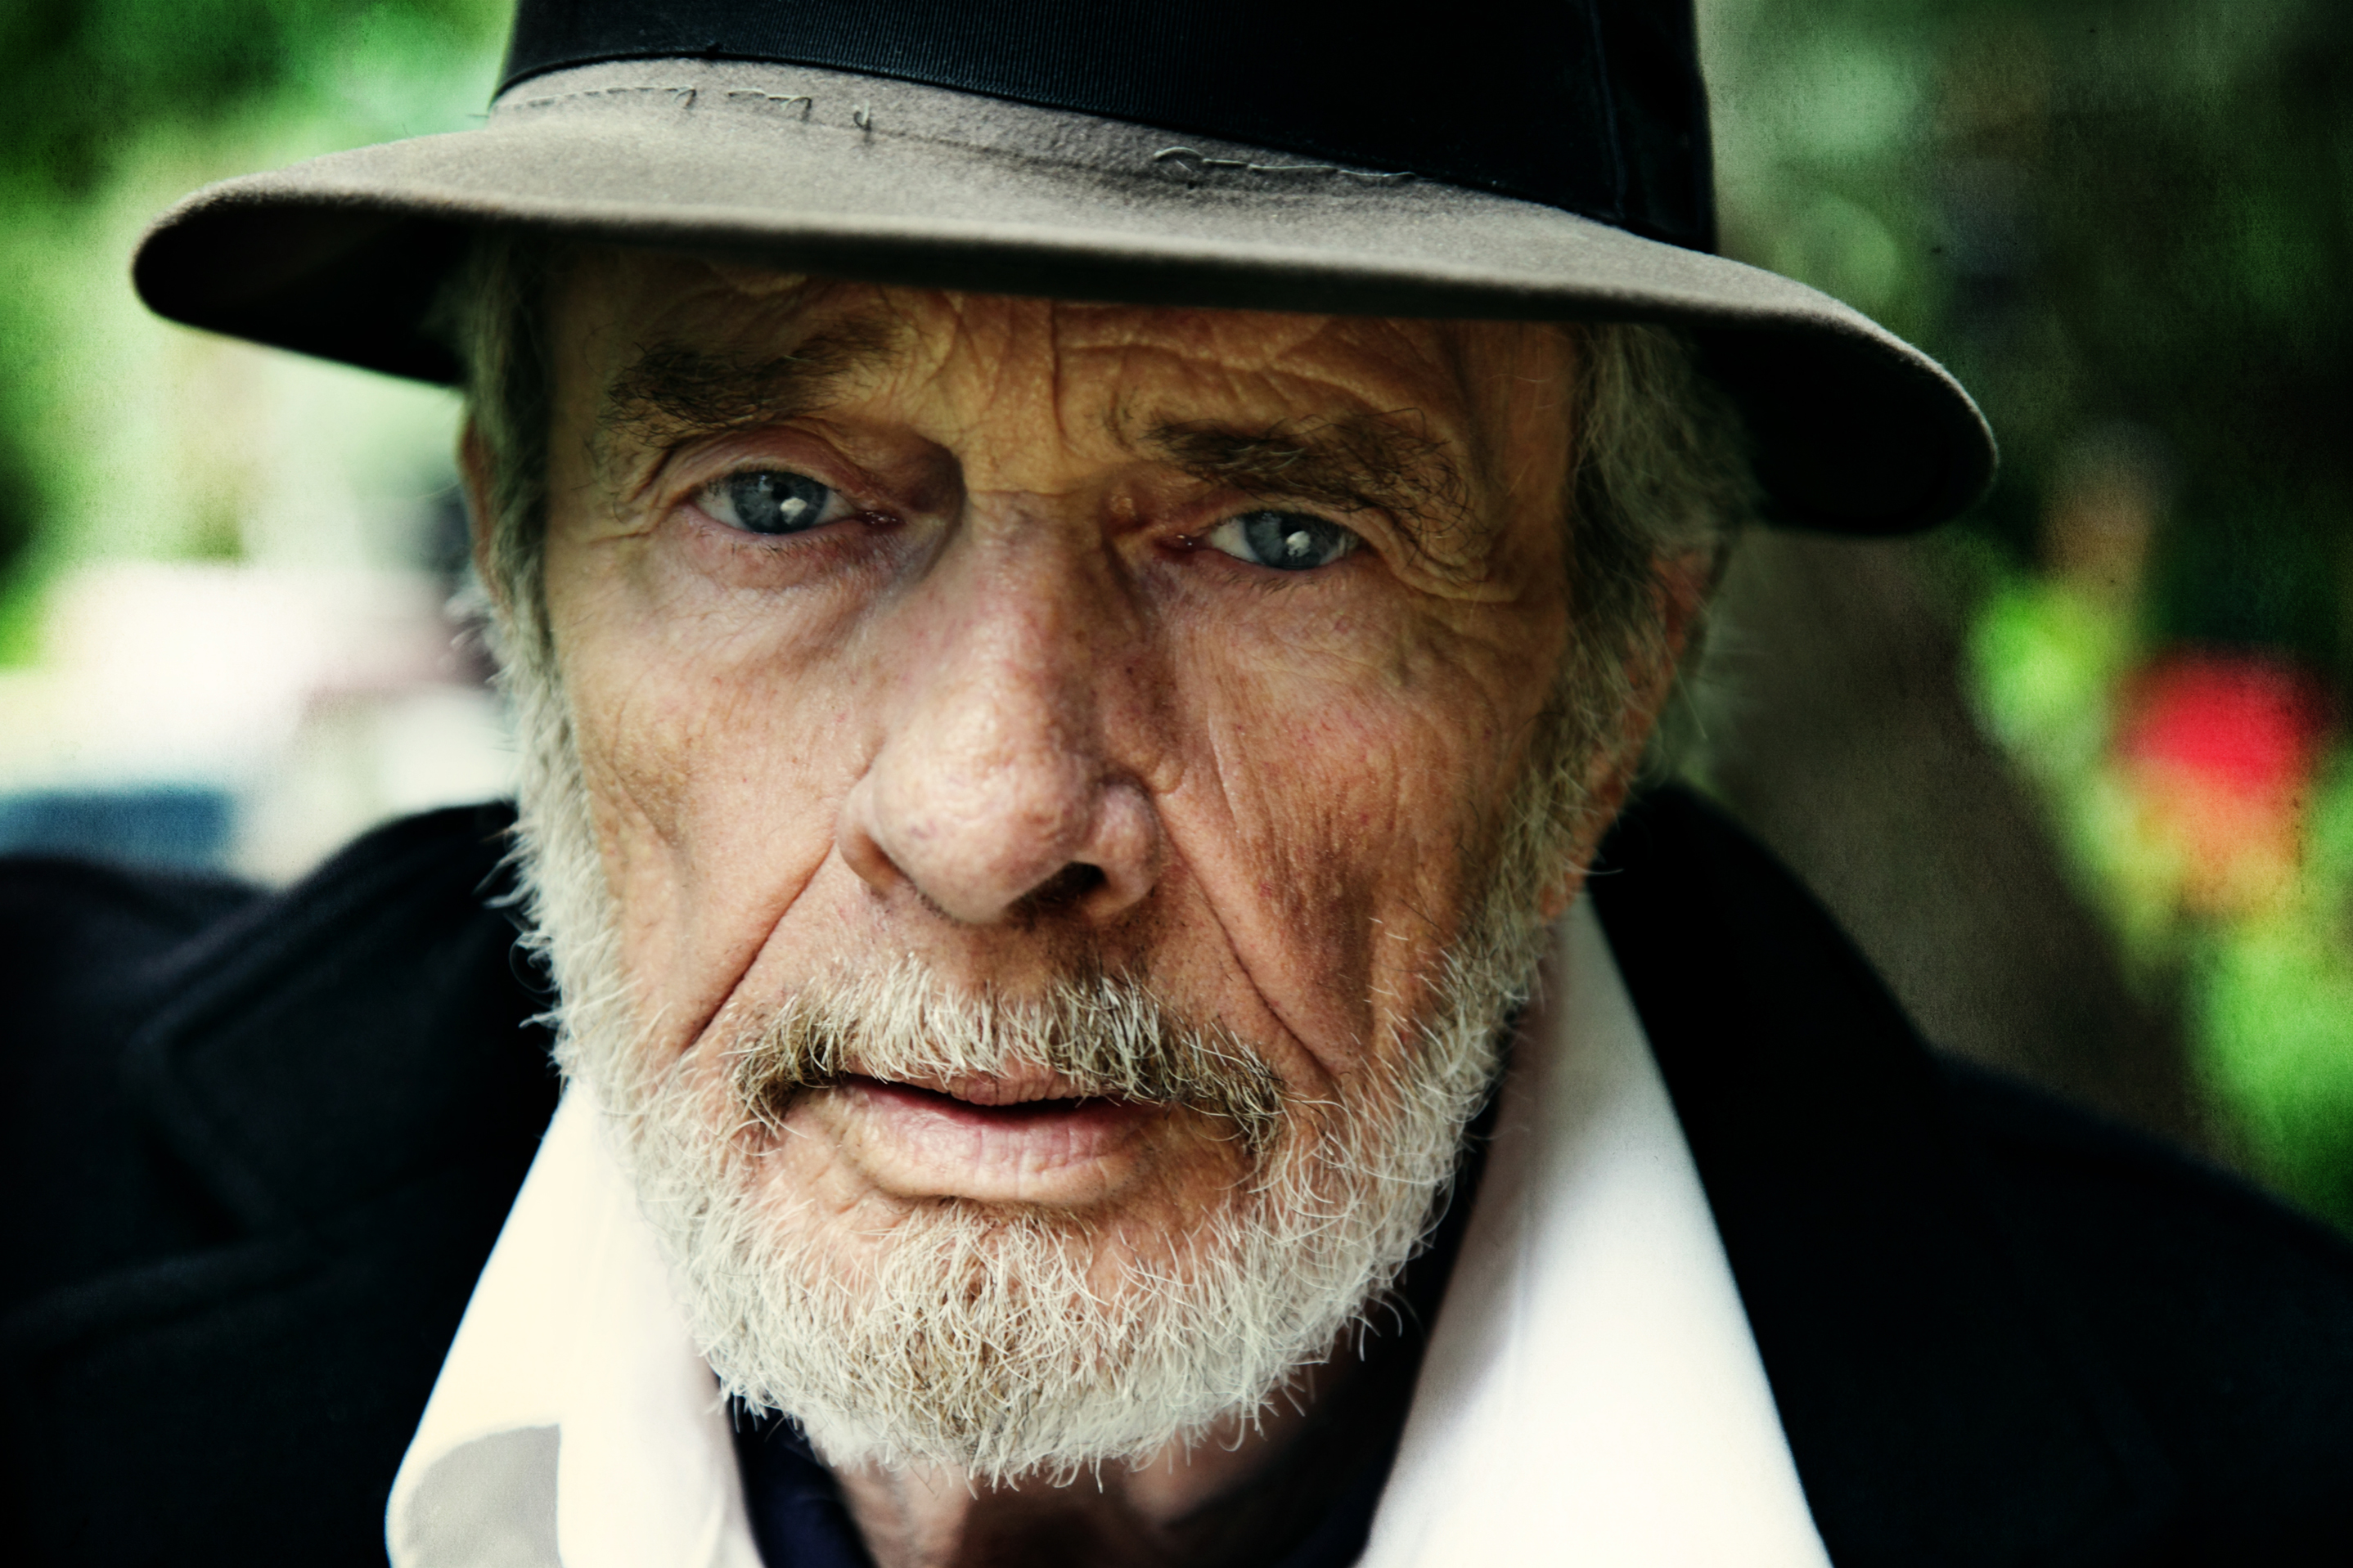 Download Merle Haggard wallpapers for mobile phone free Merle Haggard  HD pictures